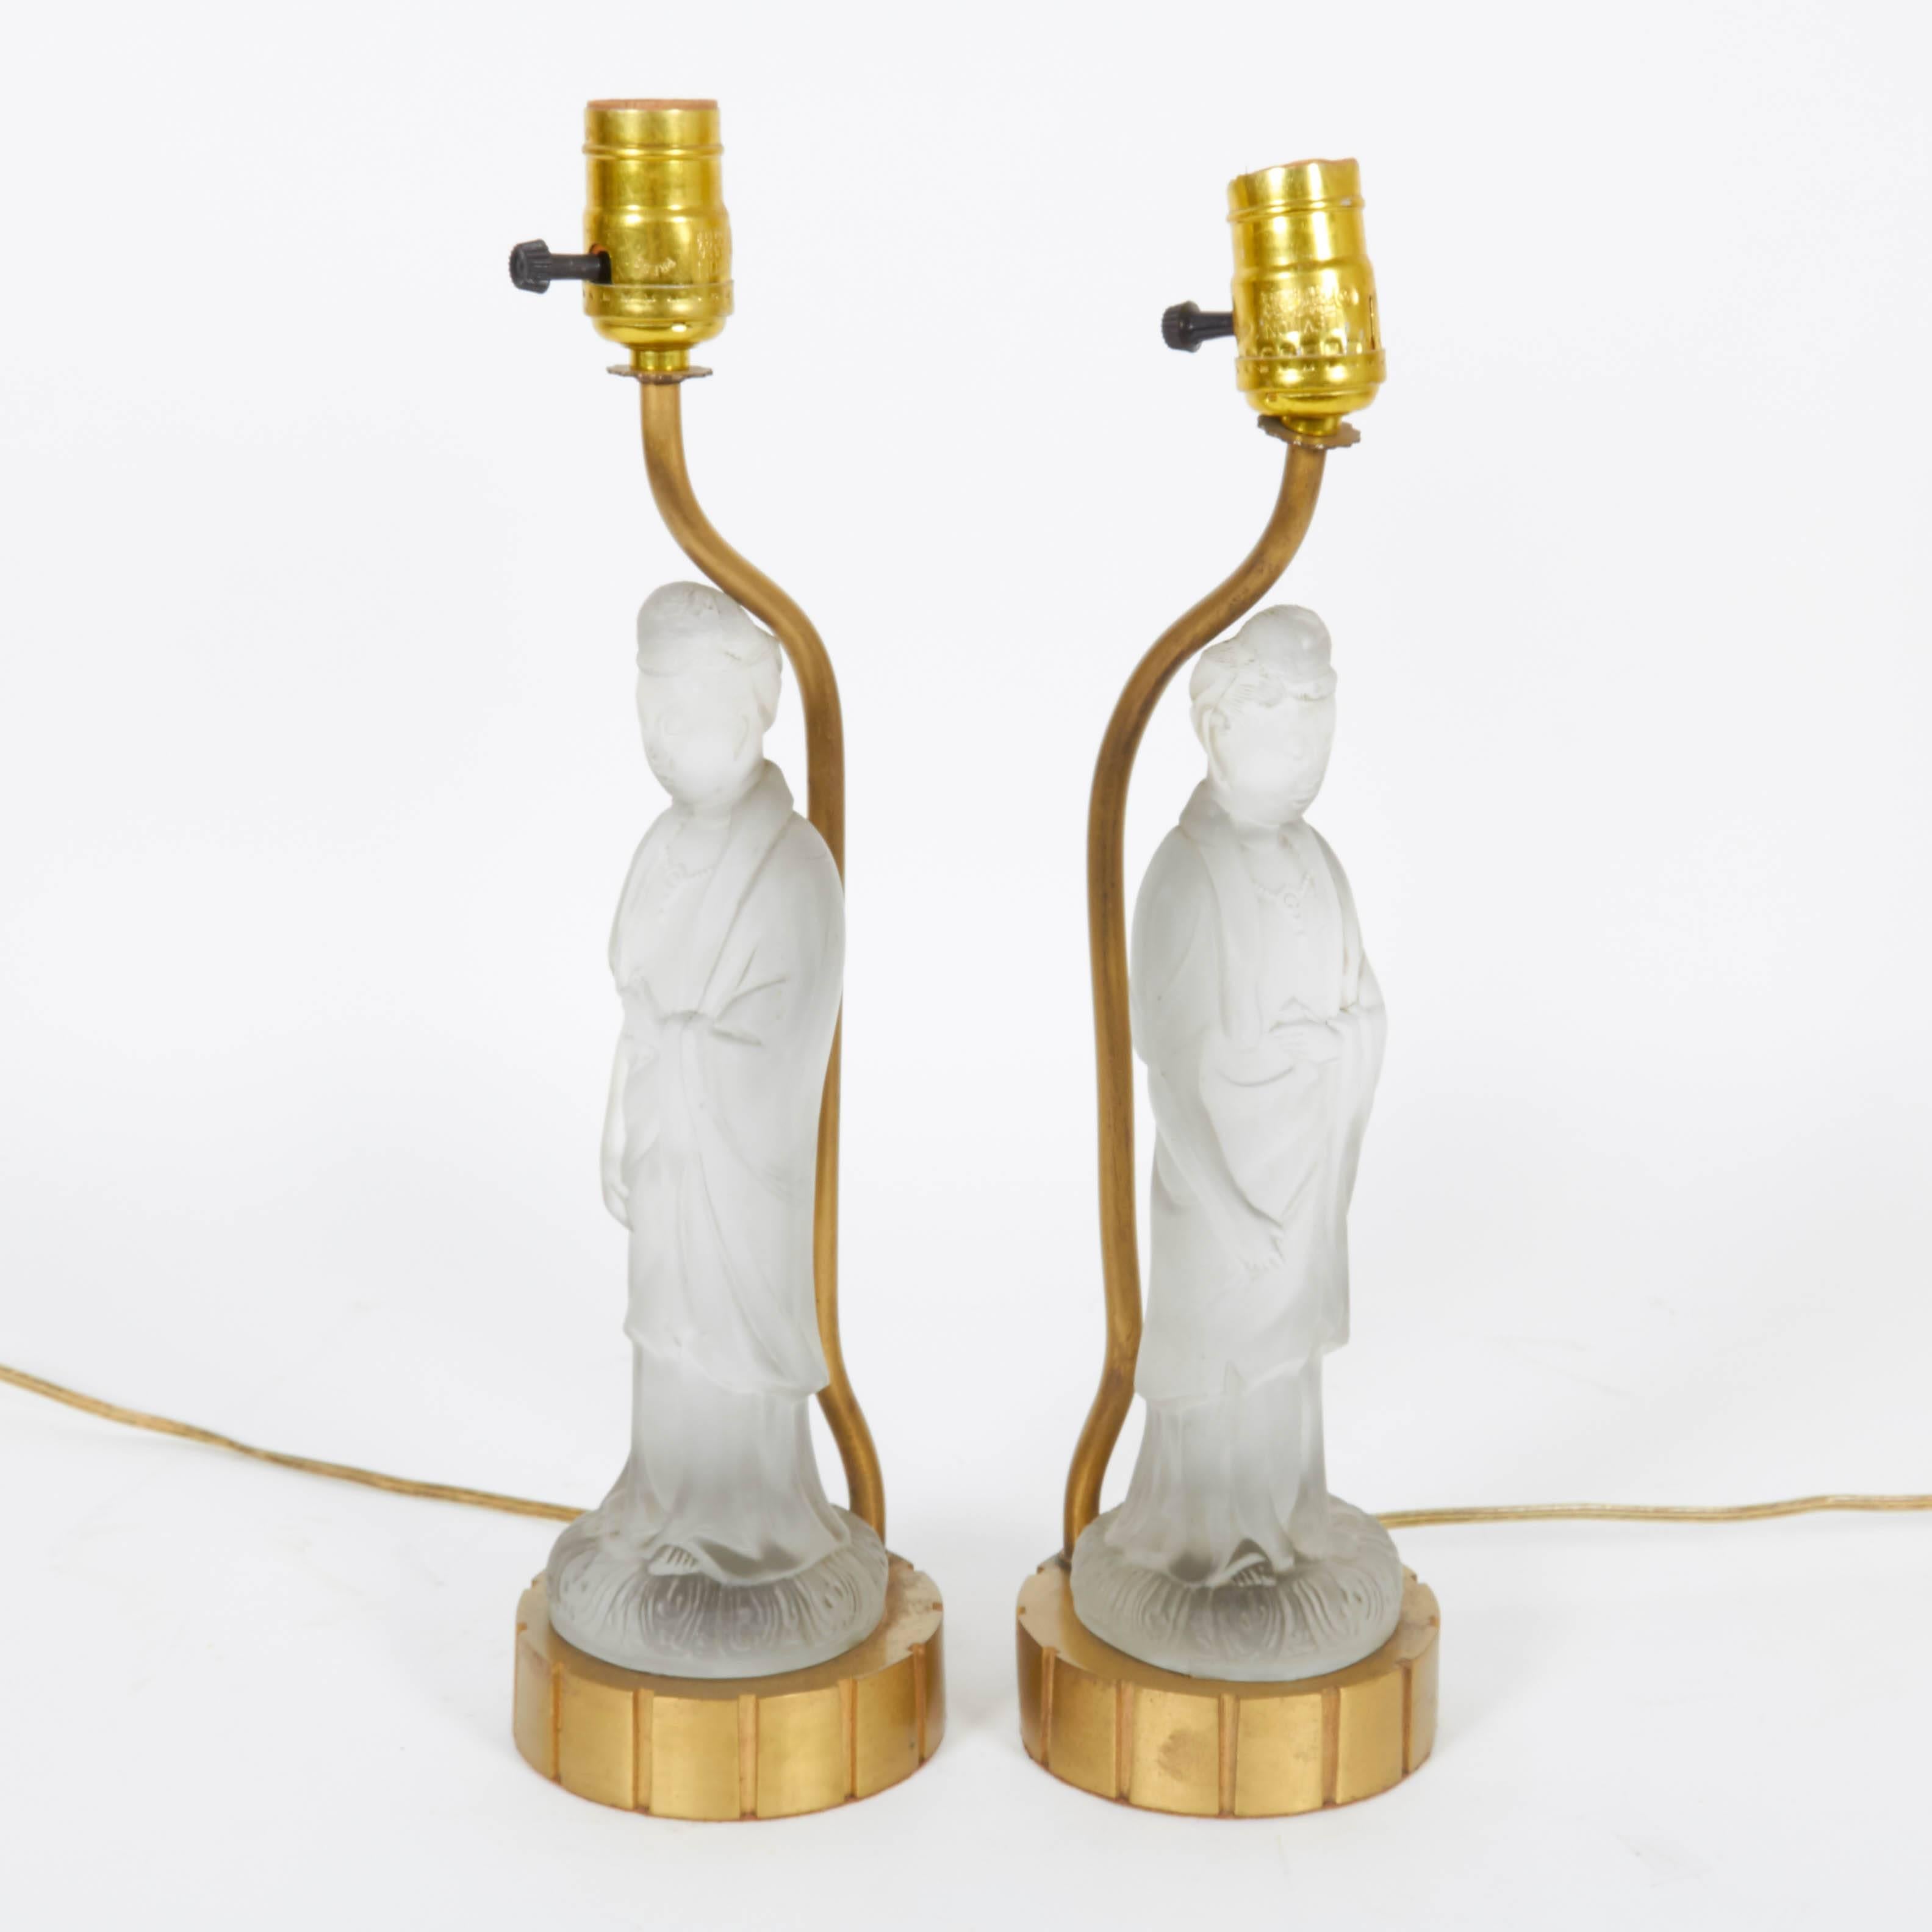 A pair of circa 1920s figural table lamps, each featuring a satin glass Quan Yin mounted on brass base. Very good vintage condition, with some wear to sockets; includes original wiring.

11063